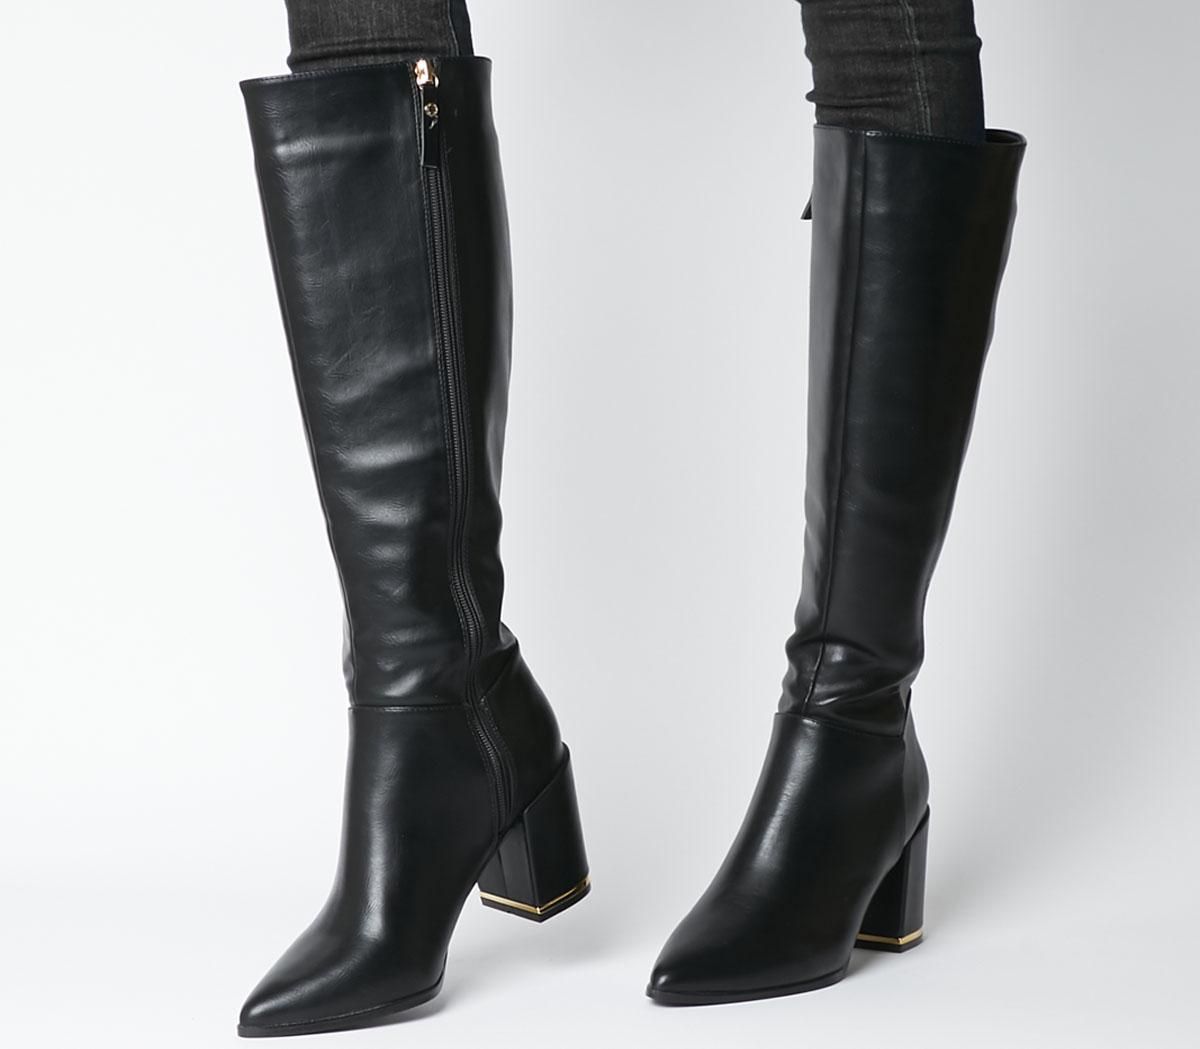 black leather knee high boots uk